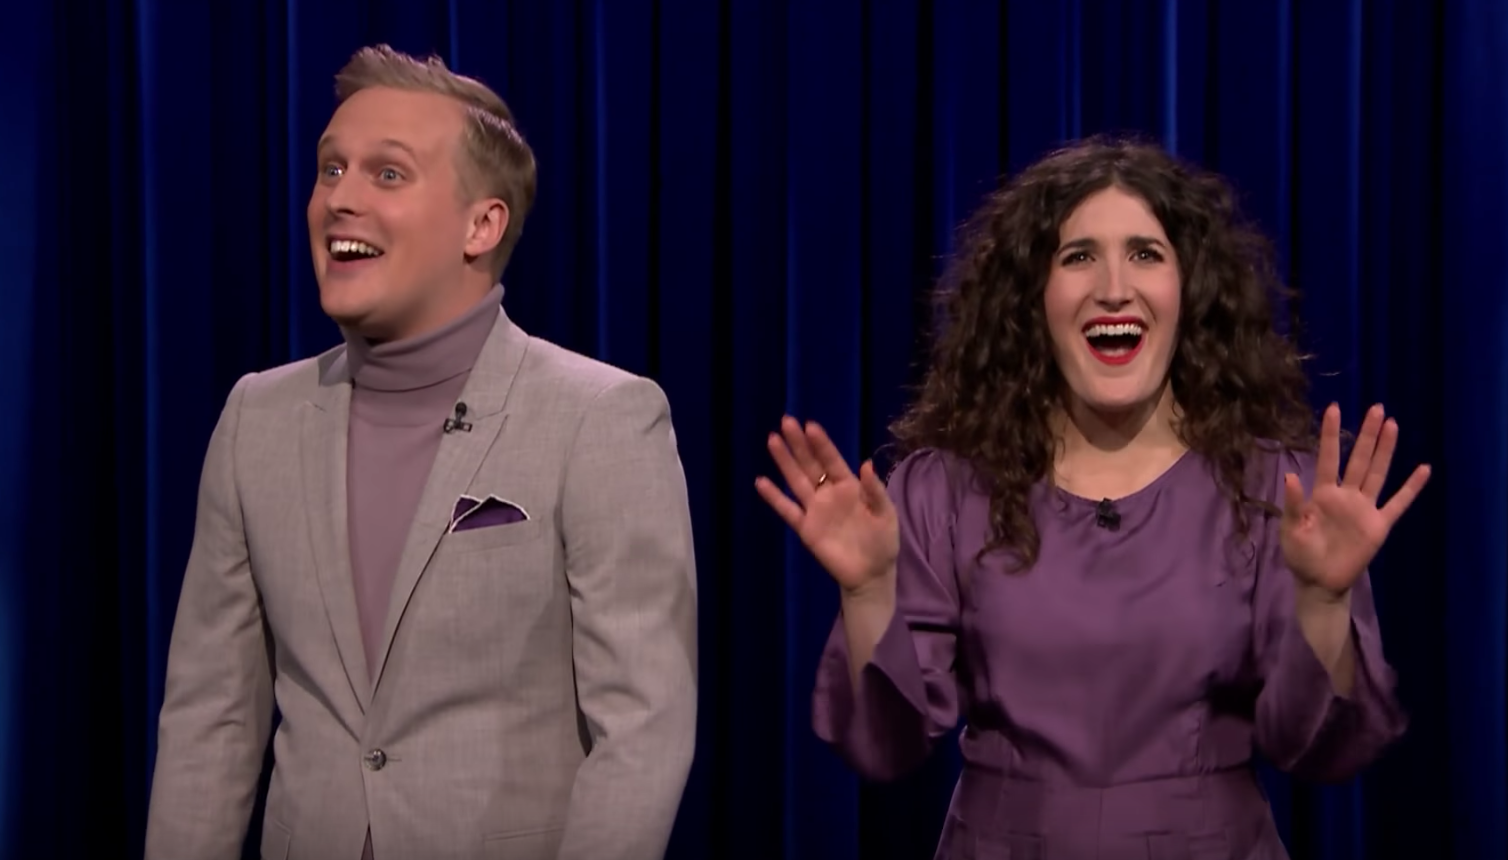 Kate Berlant and John Early on The Tonight Show Starring Jimmy Fallon